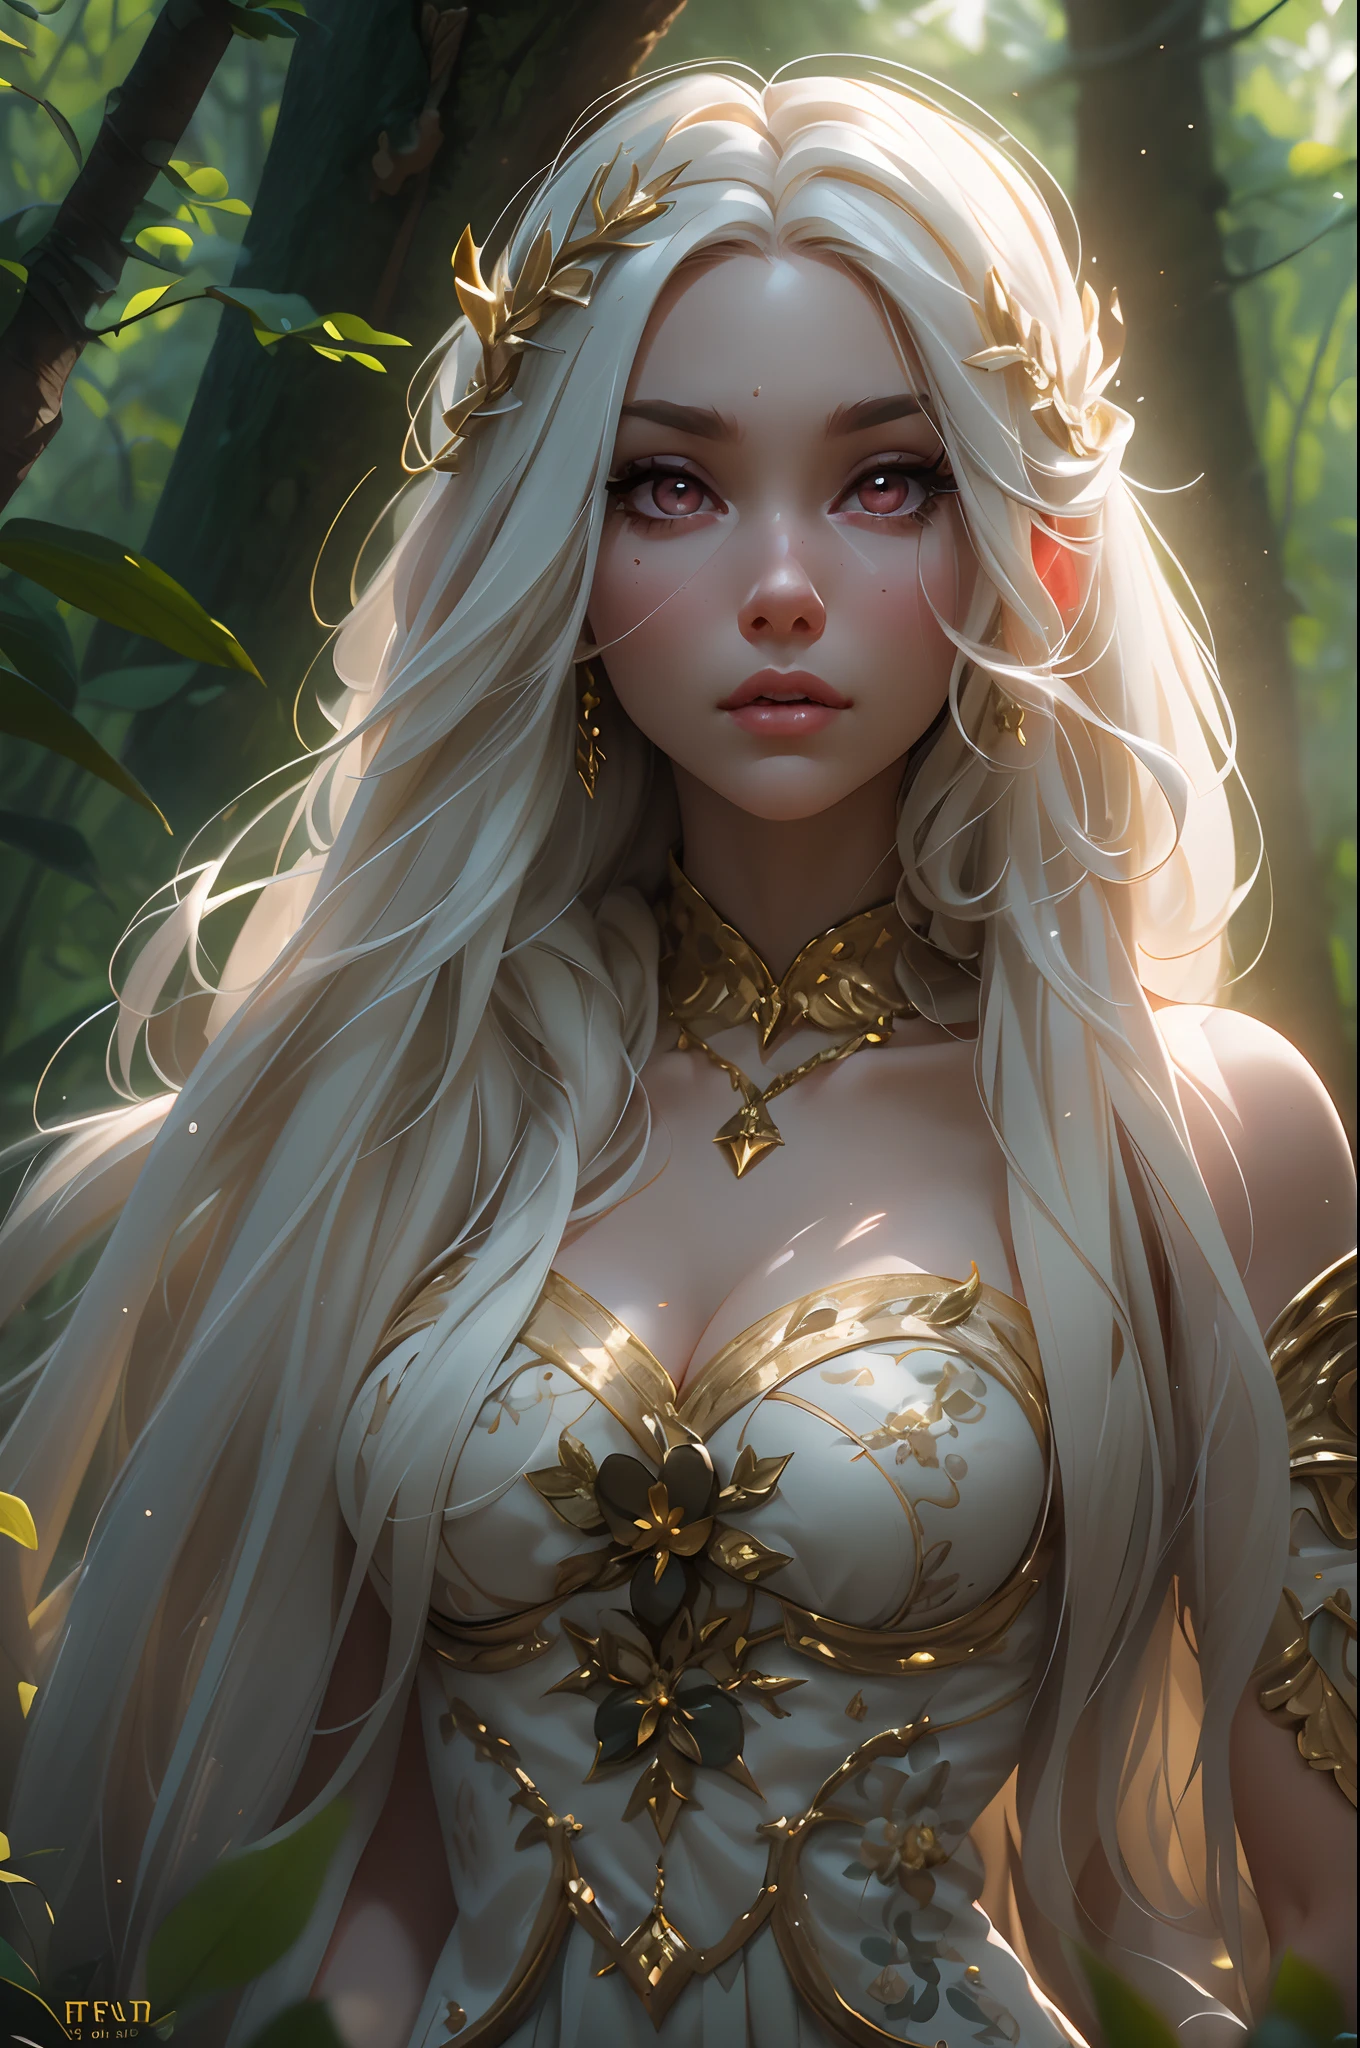 A stunning girl with long white hair, Fair skin, and red eyes, In the forest with cinematic lighting, Dark and low light. She wore a golden white dress, Her eyes focused, looking at viewert. Her skin is fair, Her face is delicate and flawless, A masterpiece, highest quality art. The image is a very detailed 8K CG wallpaper, Features artistic cinematic lighting and cinematic tones with neutral filters.